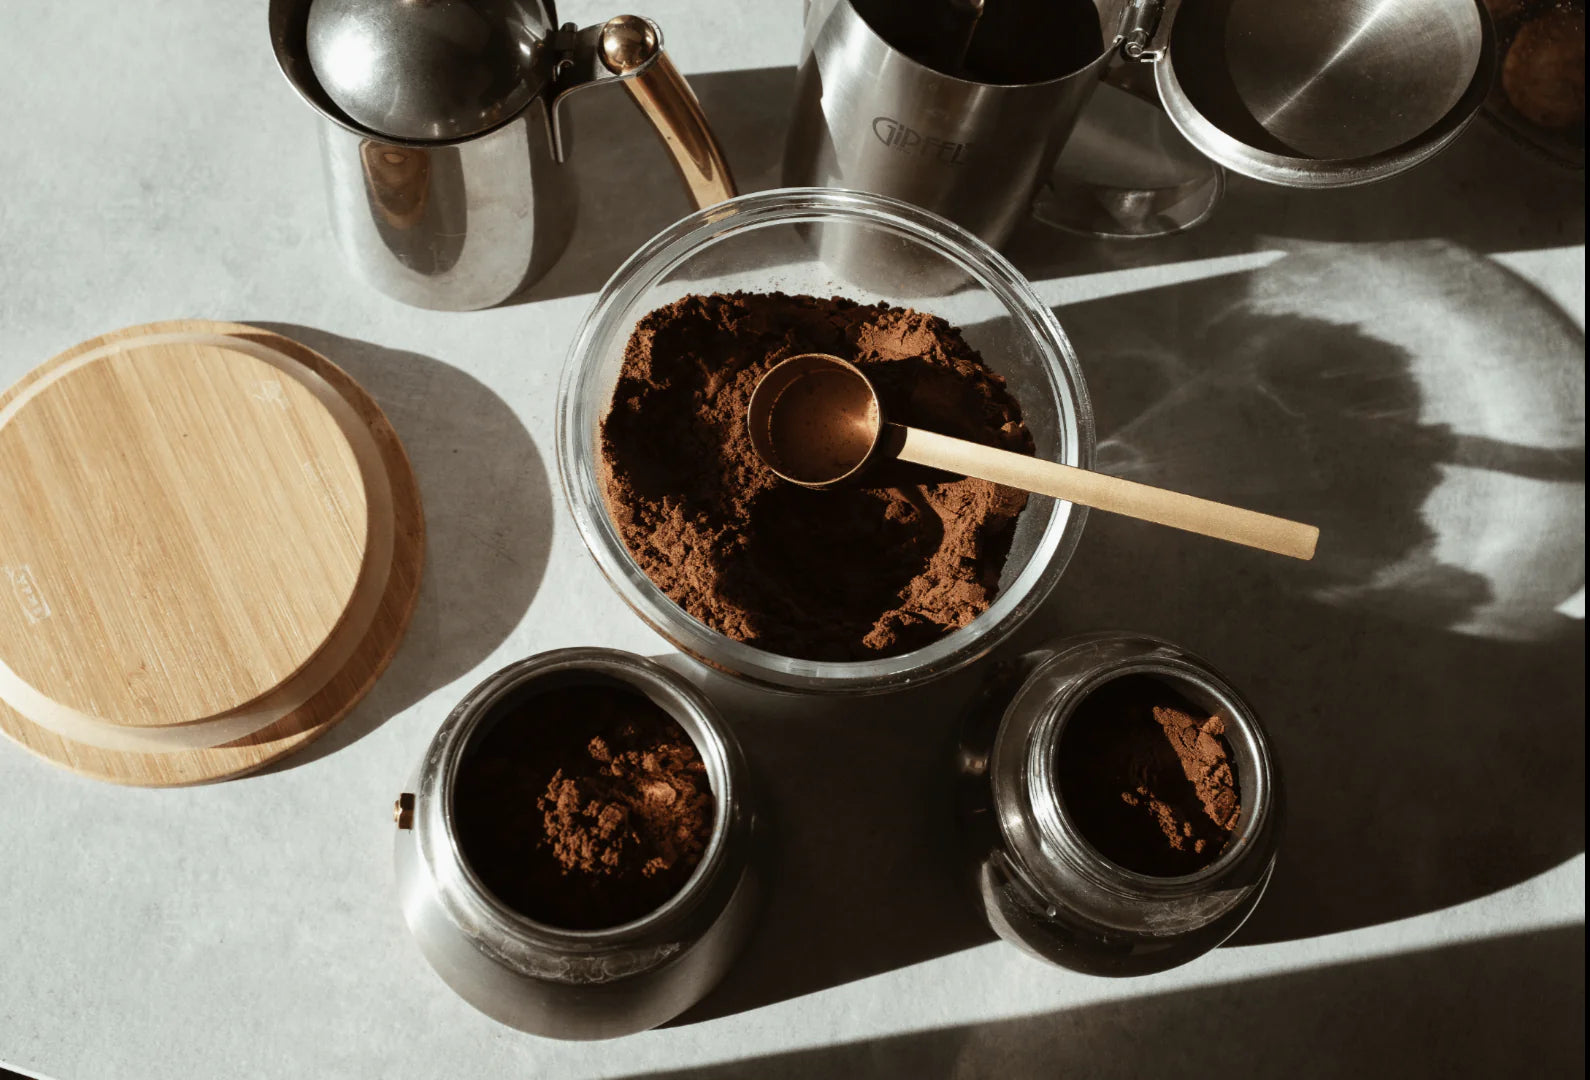 6 ways to use your spent coffee grounds